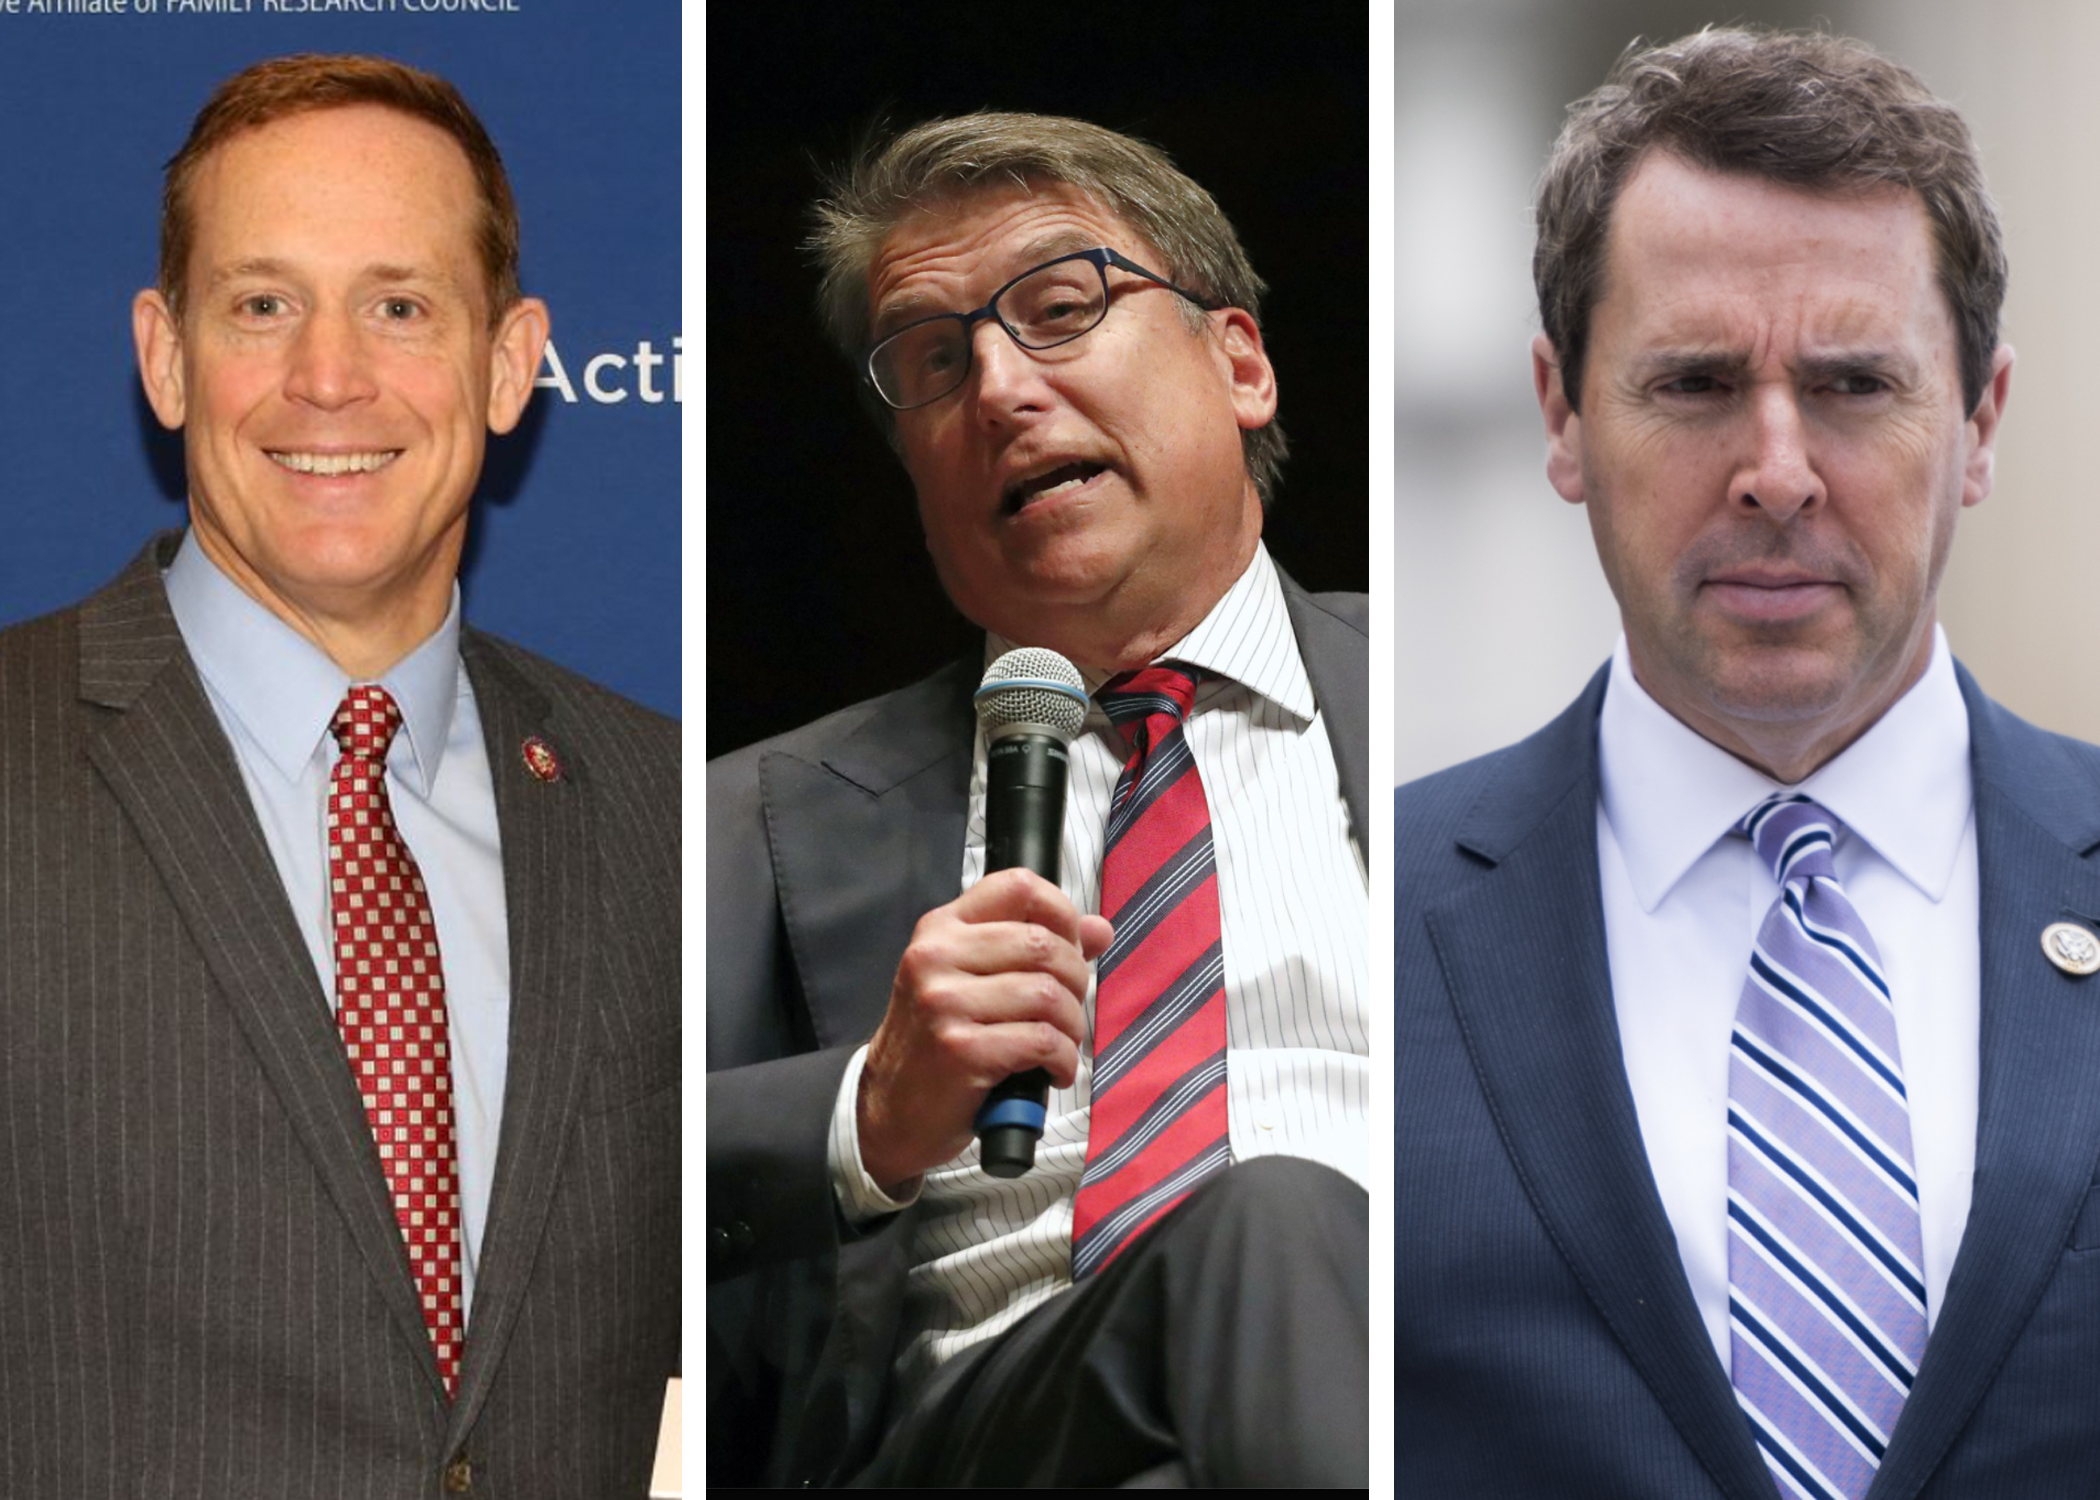 Composite image of North Carolina GOP Senate candidates (L to R): Ted Budd, Pat McCrory, and Mark Walker